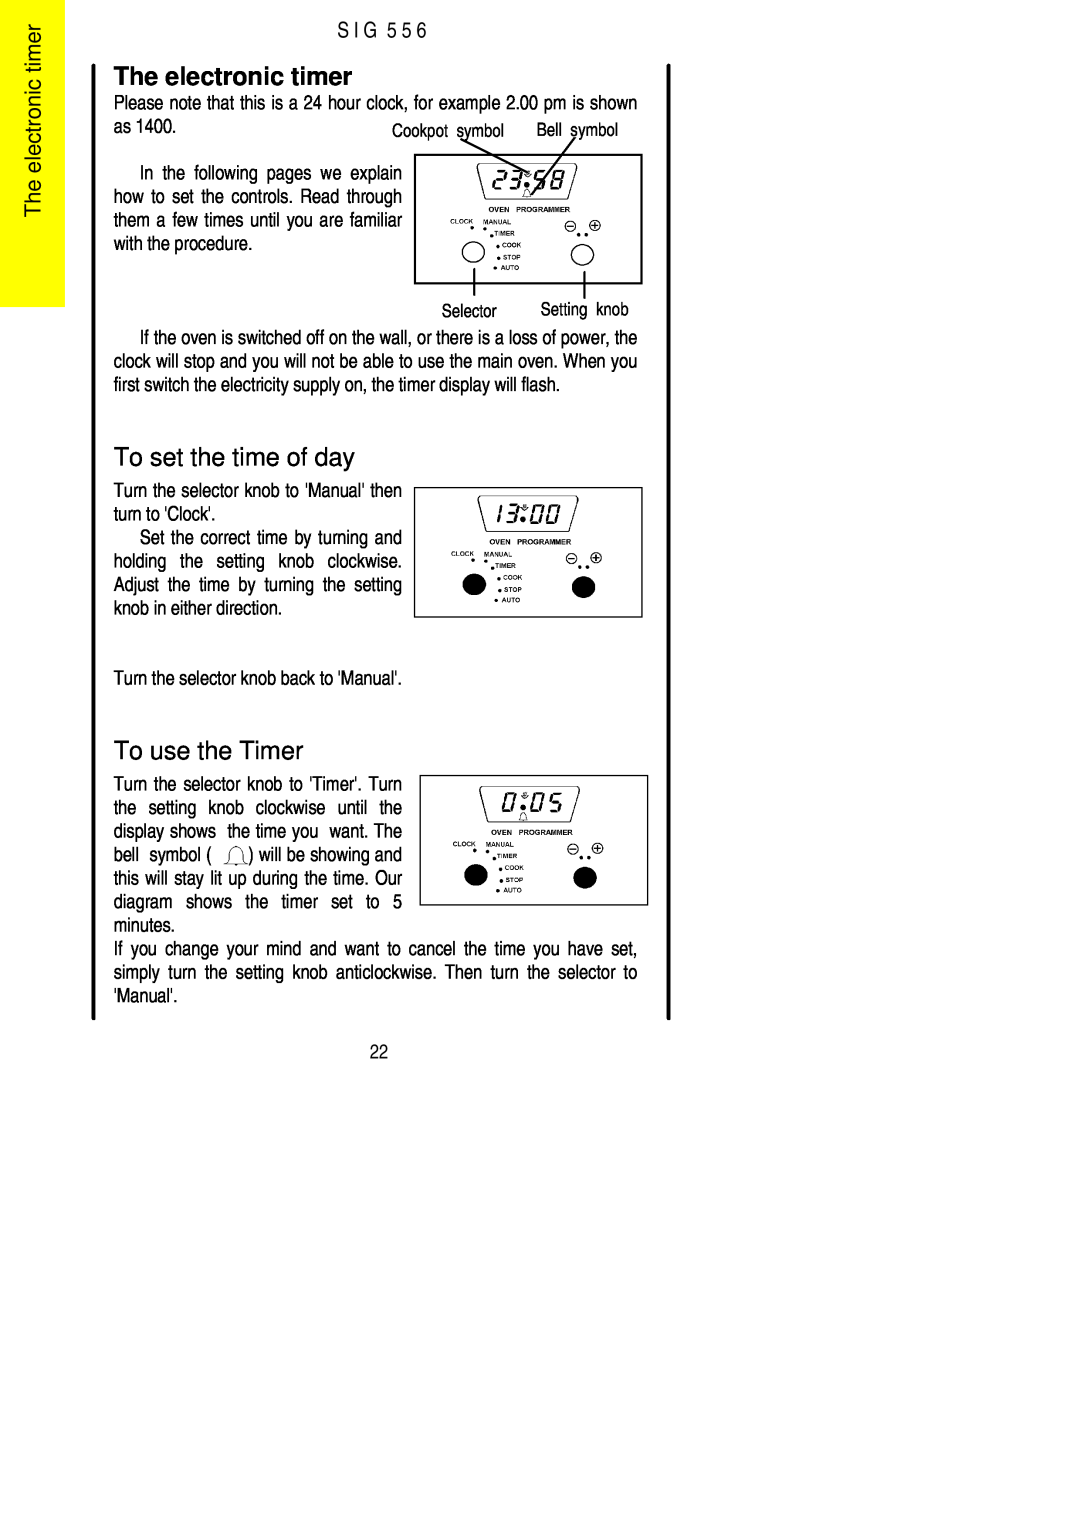 Electrolux SIG 556 installation instructions The electronic timer, To set the time of day, To use the Timer, S I G 5 5 